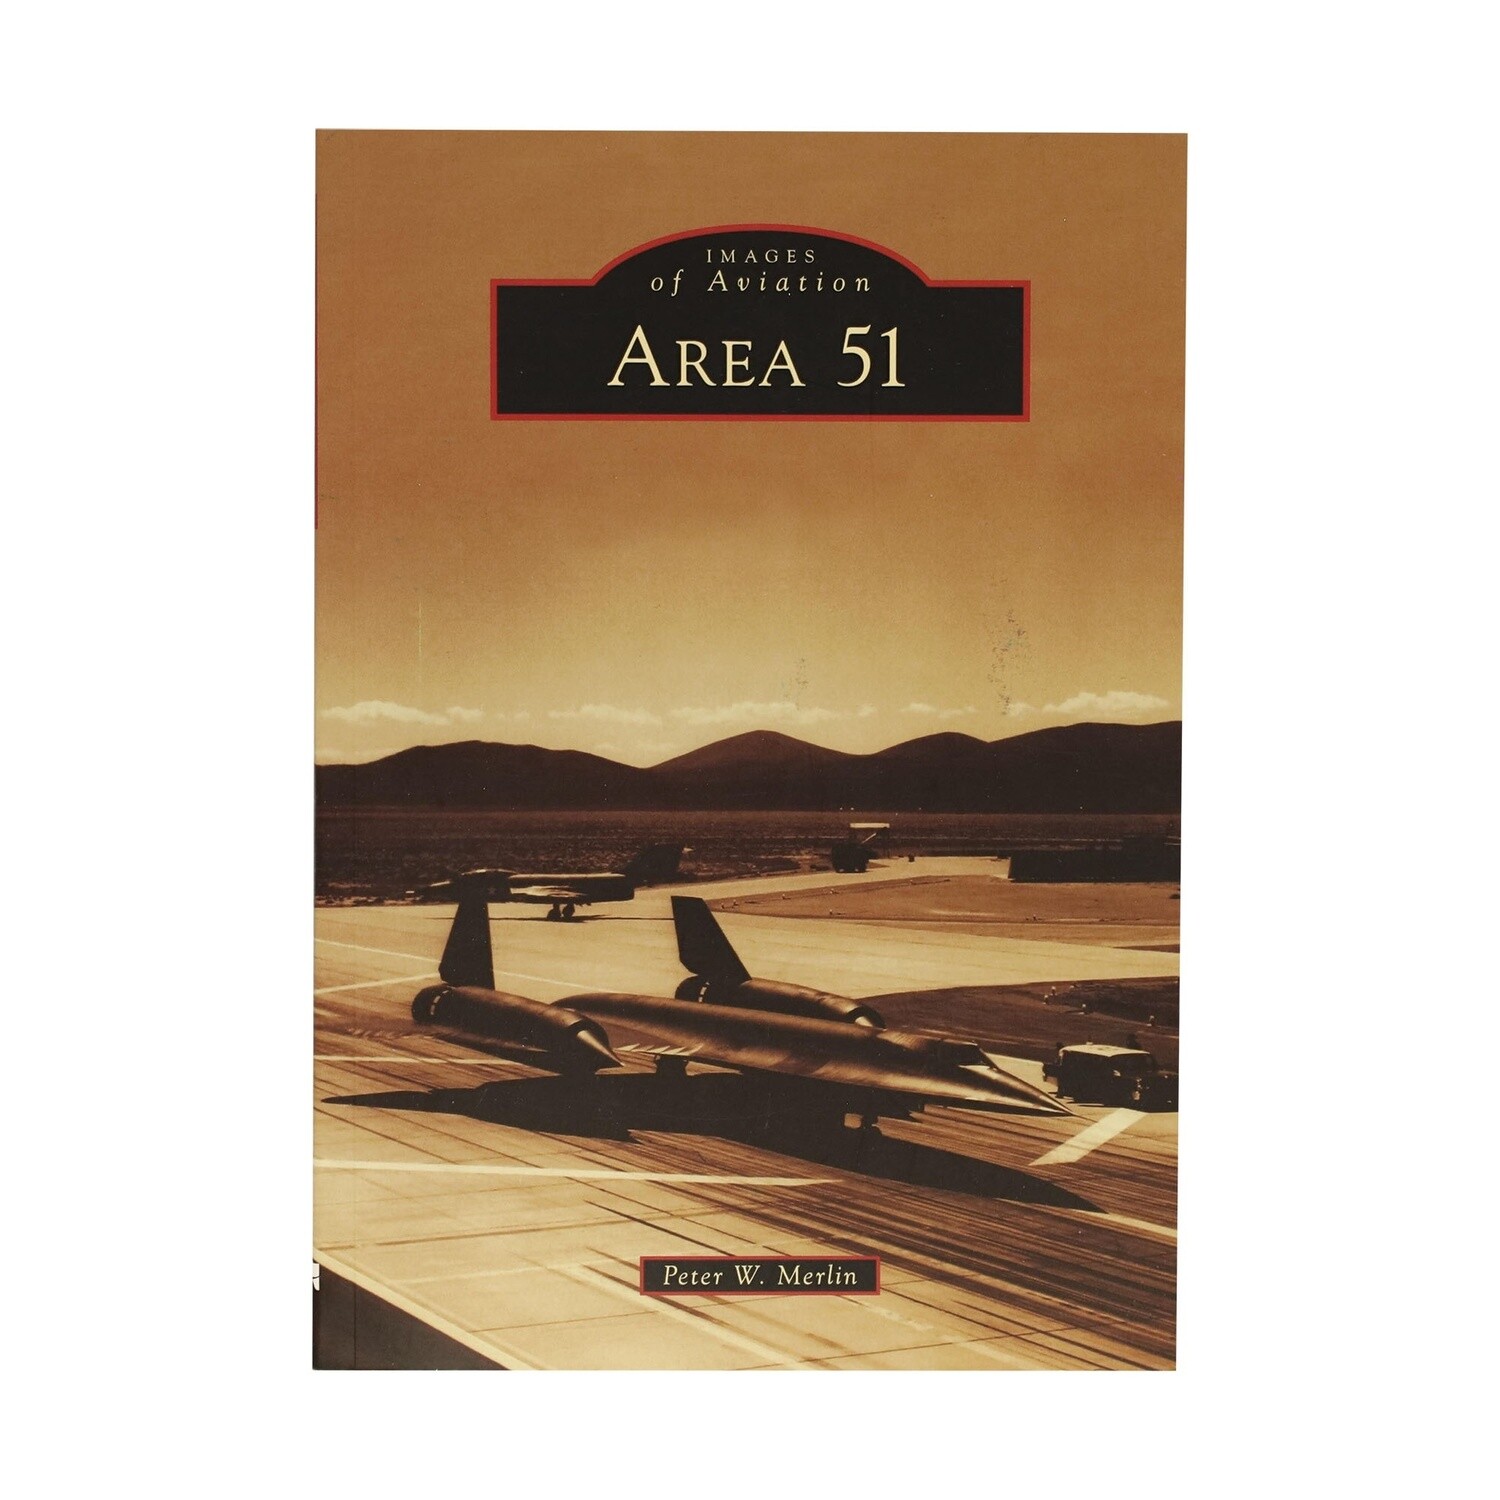 Images of Aviation: Area 51 by Reter W. Merlin